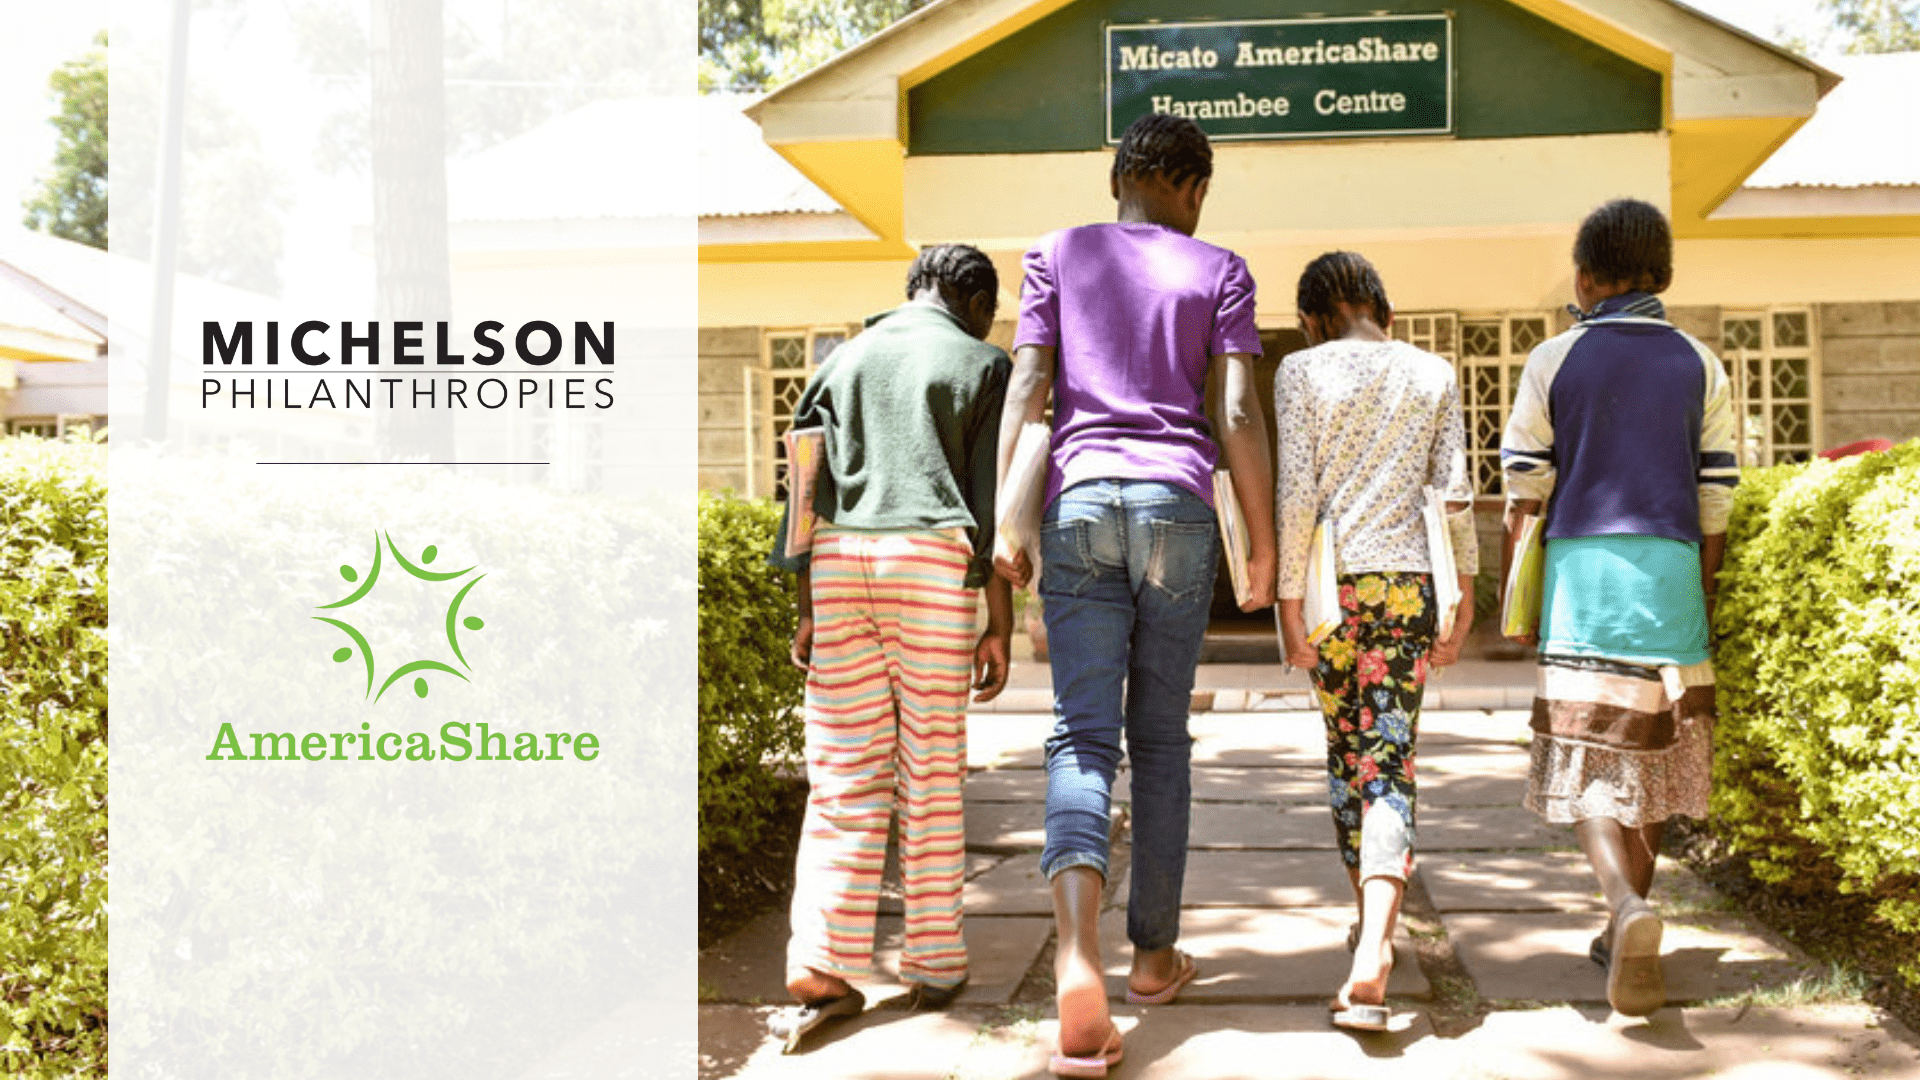 Michelson Philanthropies Grant to Micato-AmericaShare Improves Access to Education in Kenya